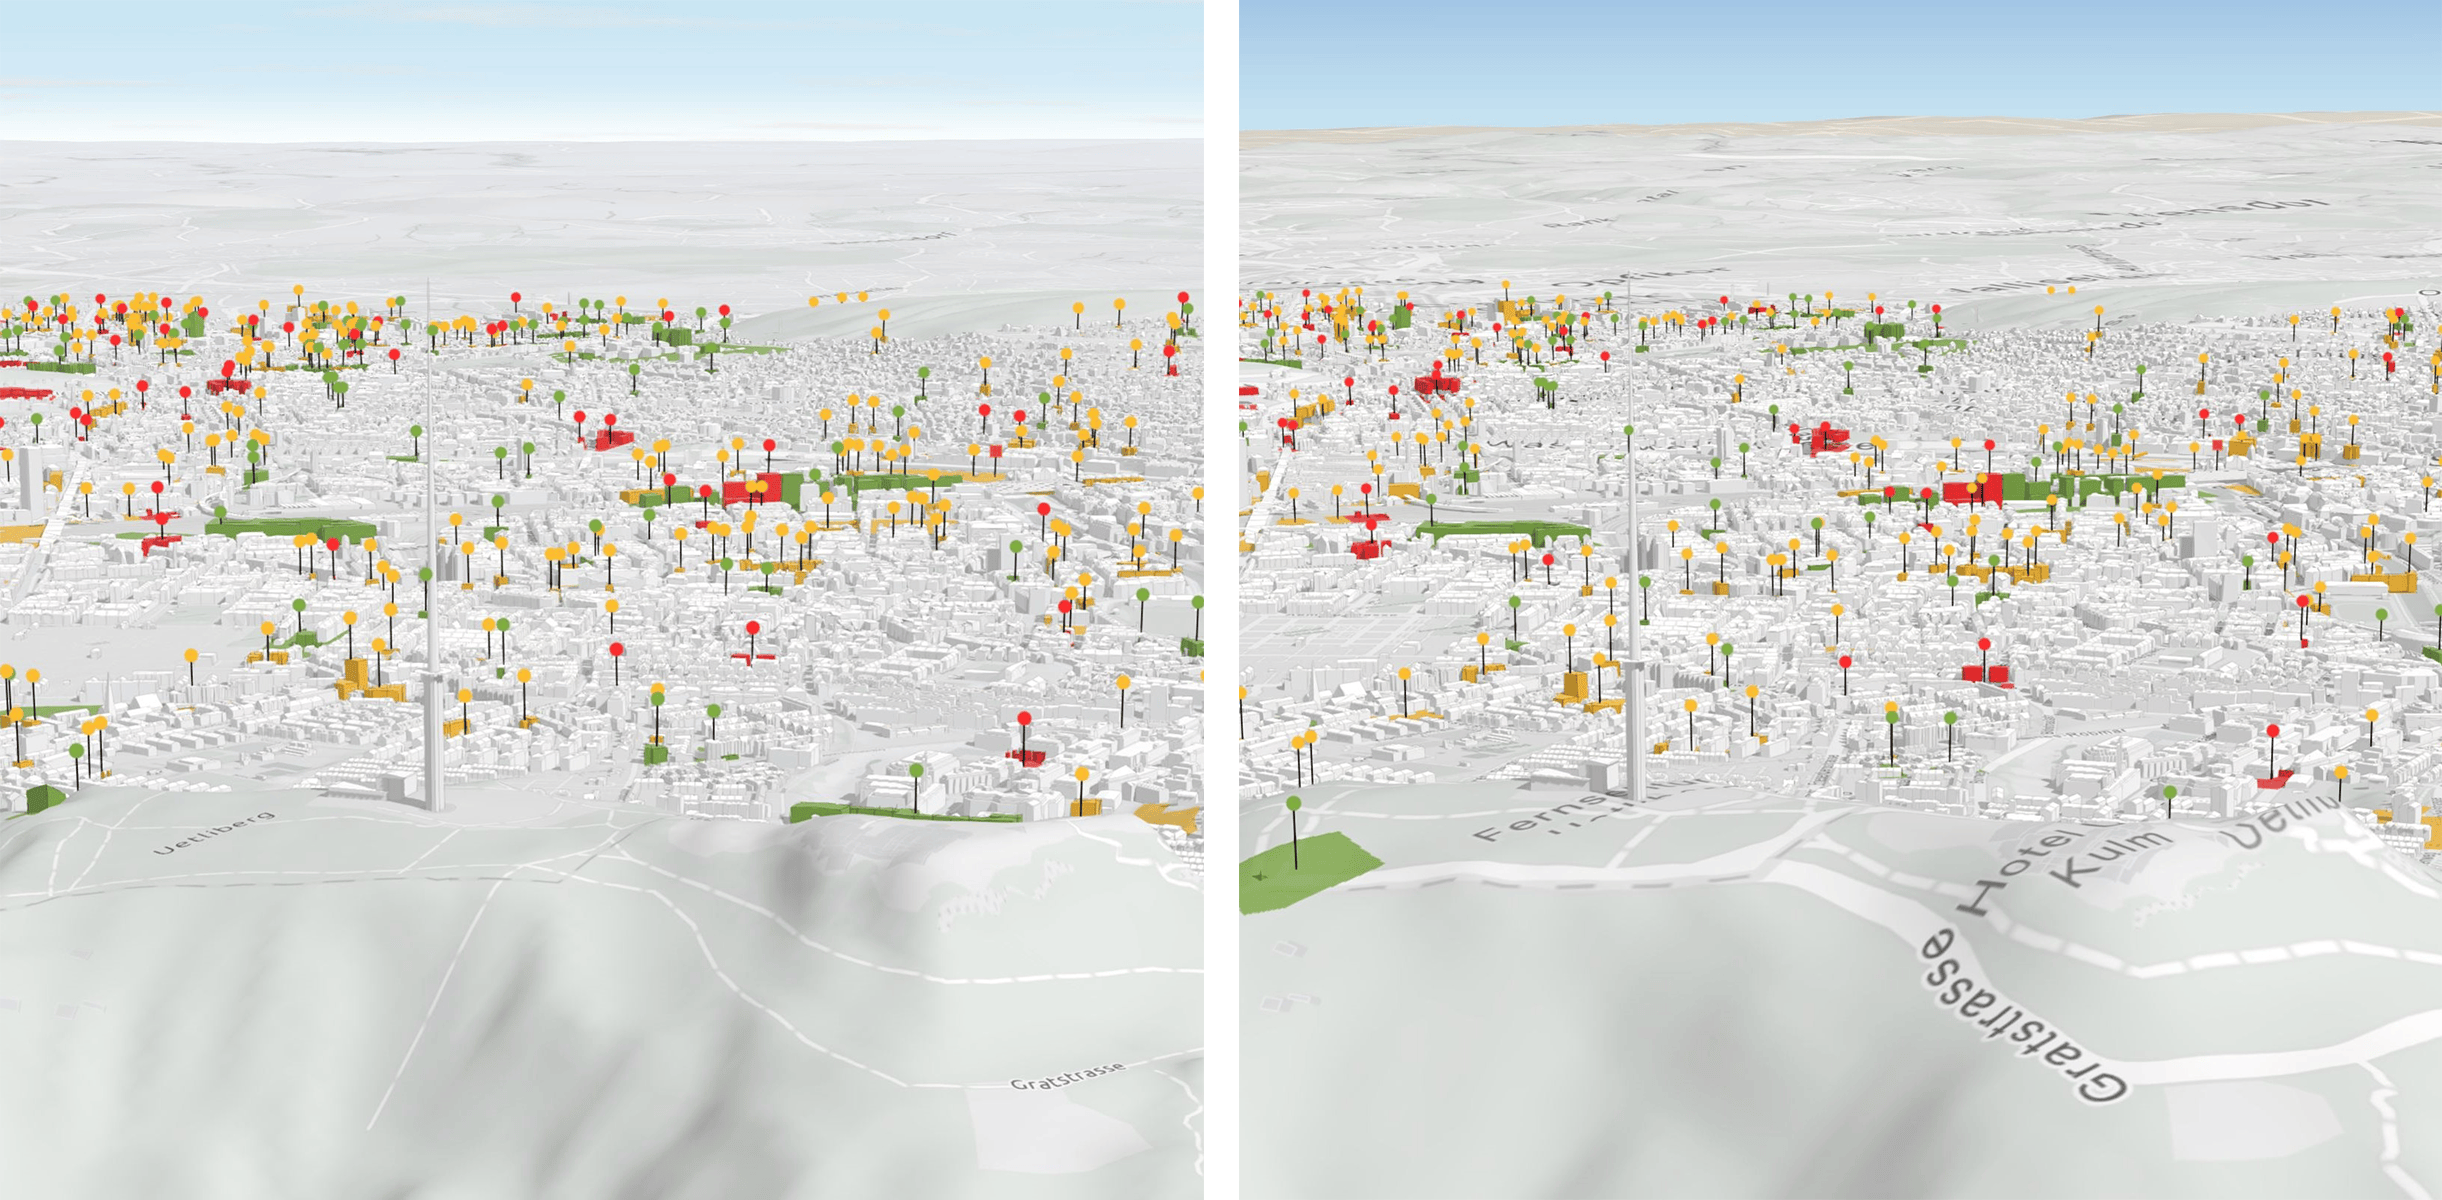 The global urban model of Zurich (left) next to the local urban model of Zurich (right). Visually, there are only slight differences.